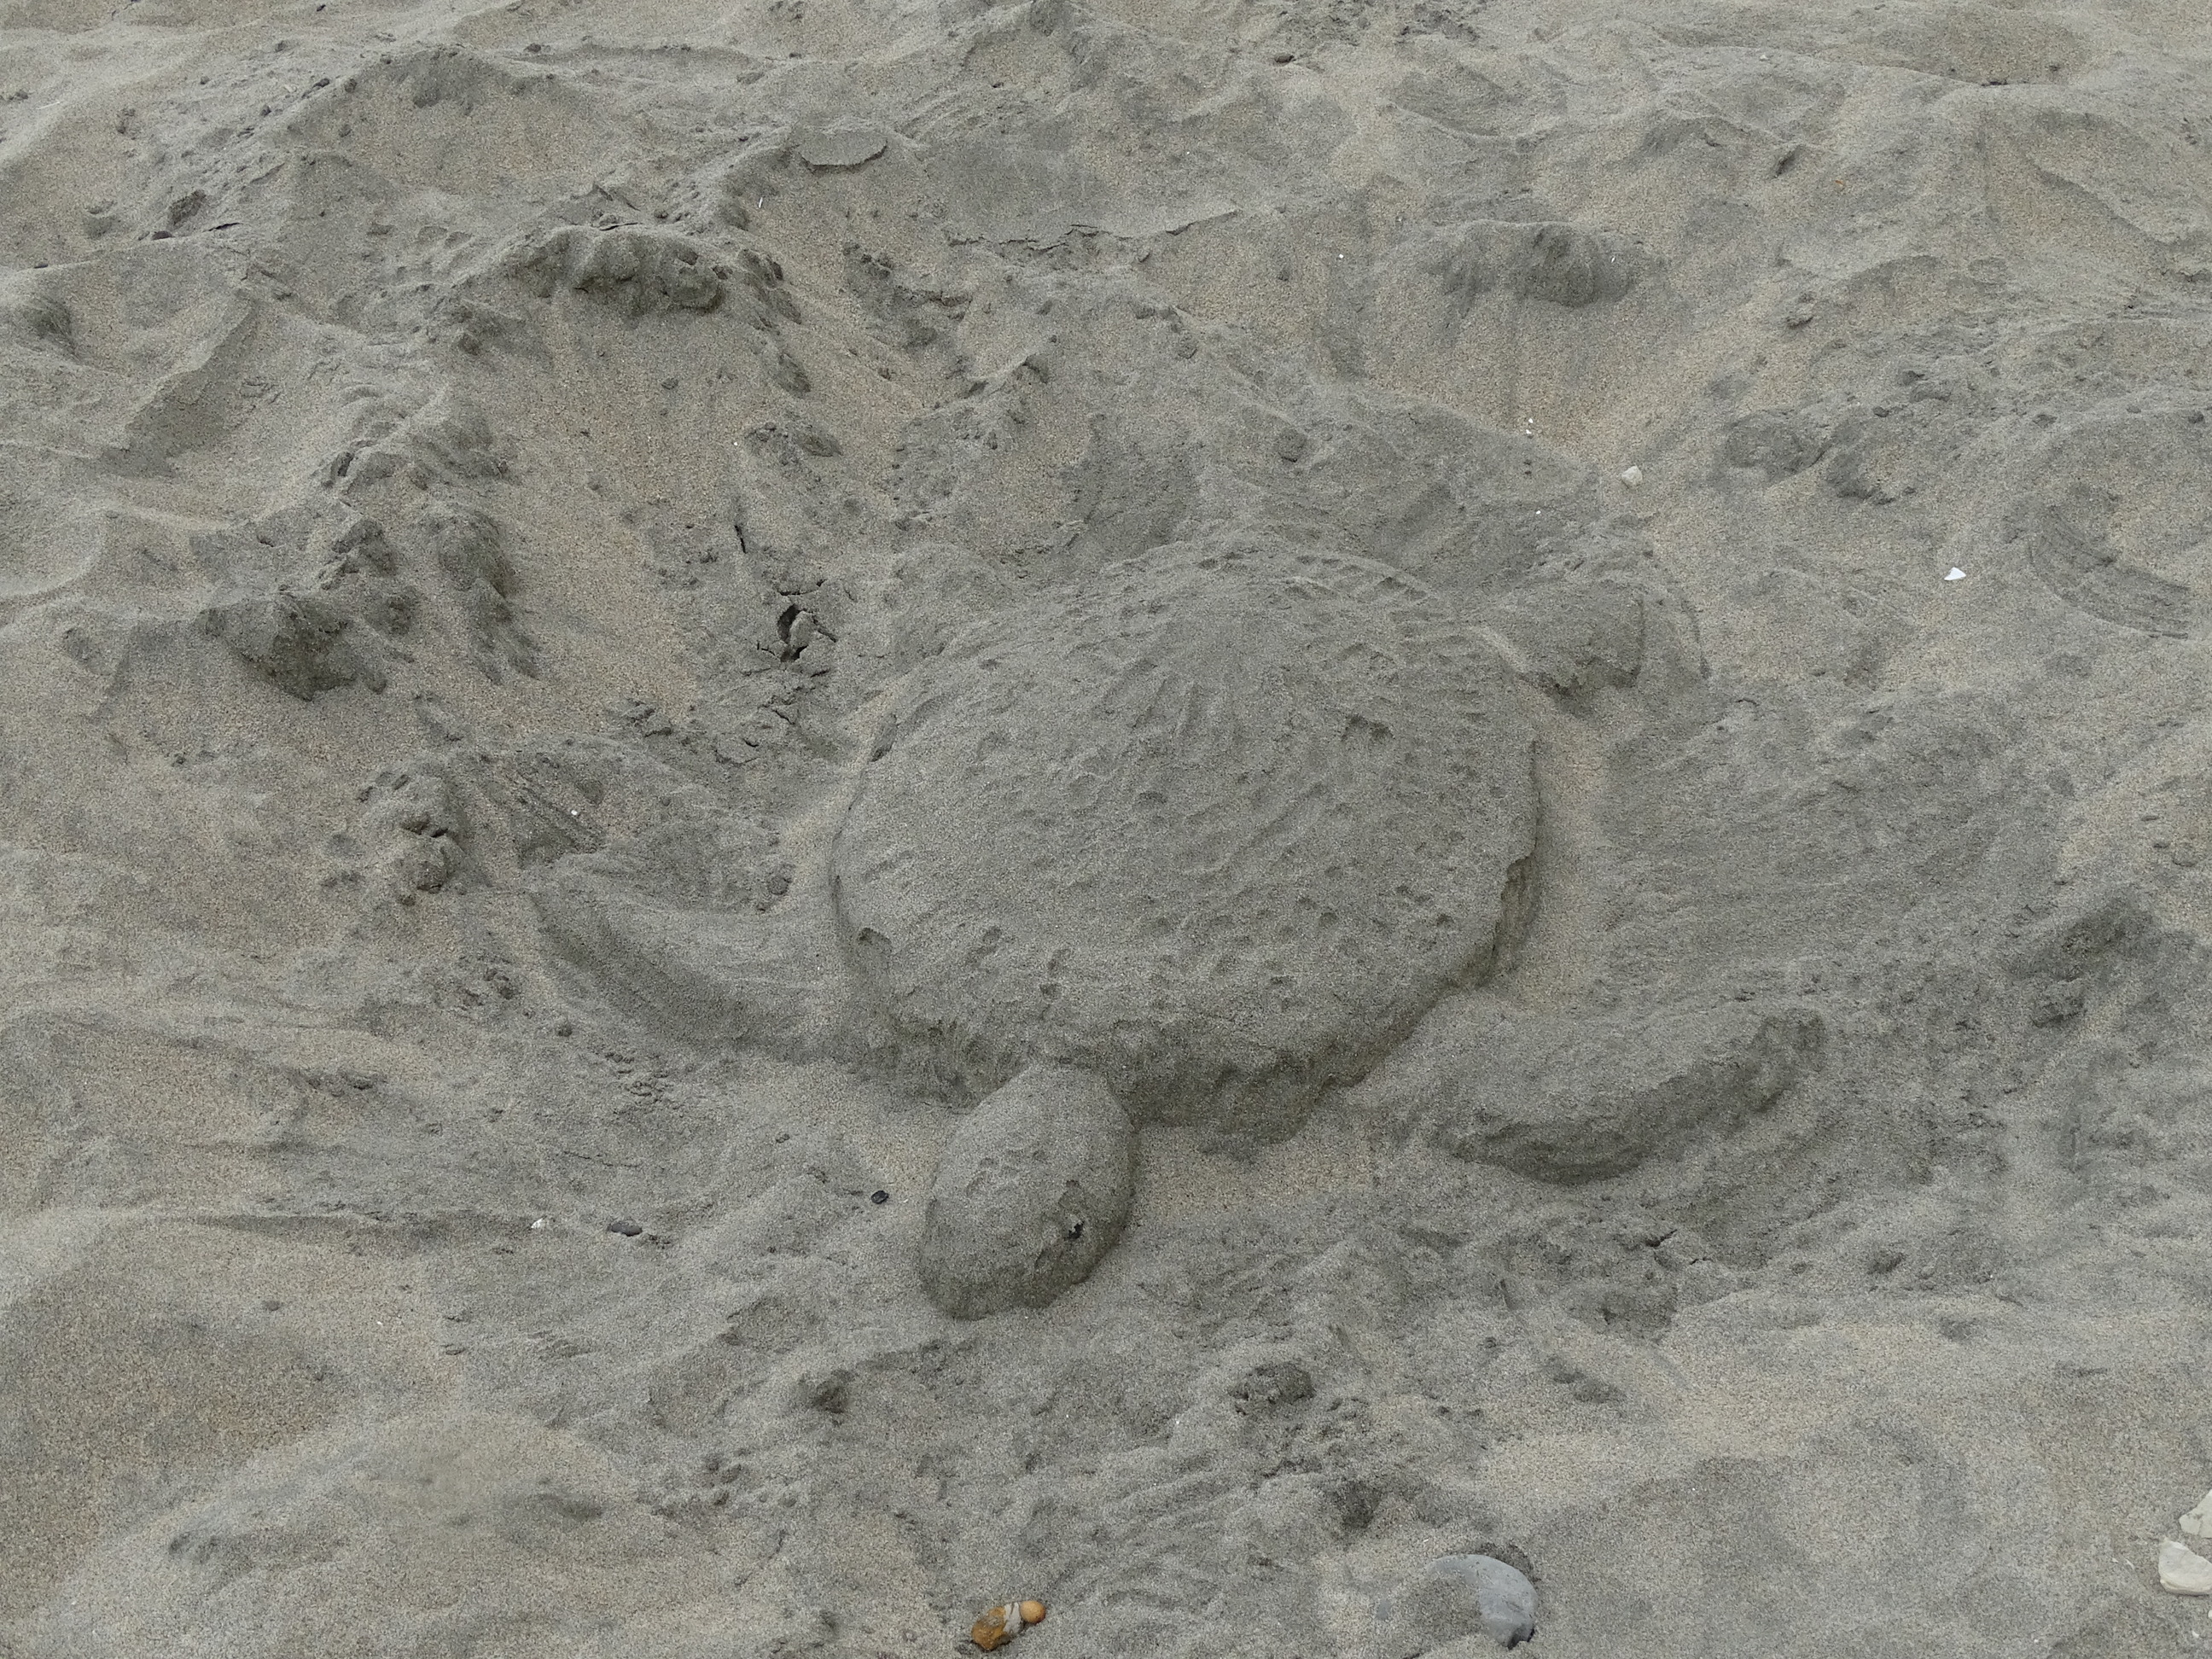 A small sand sculpture of a sea turtle.